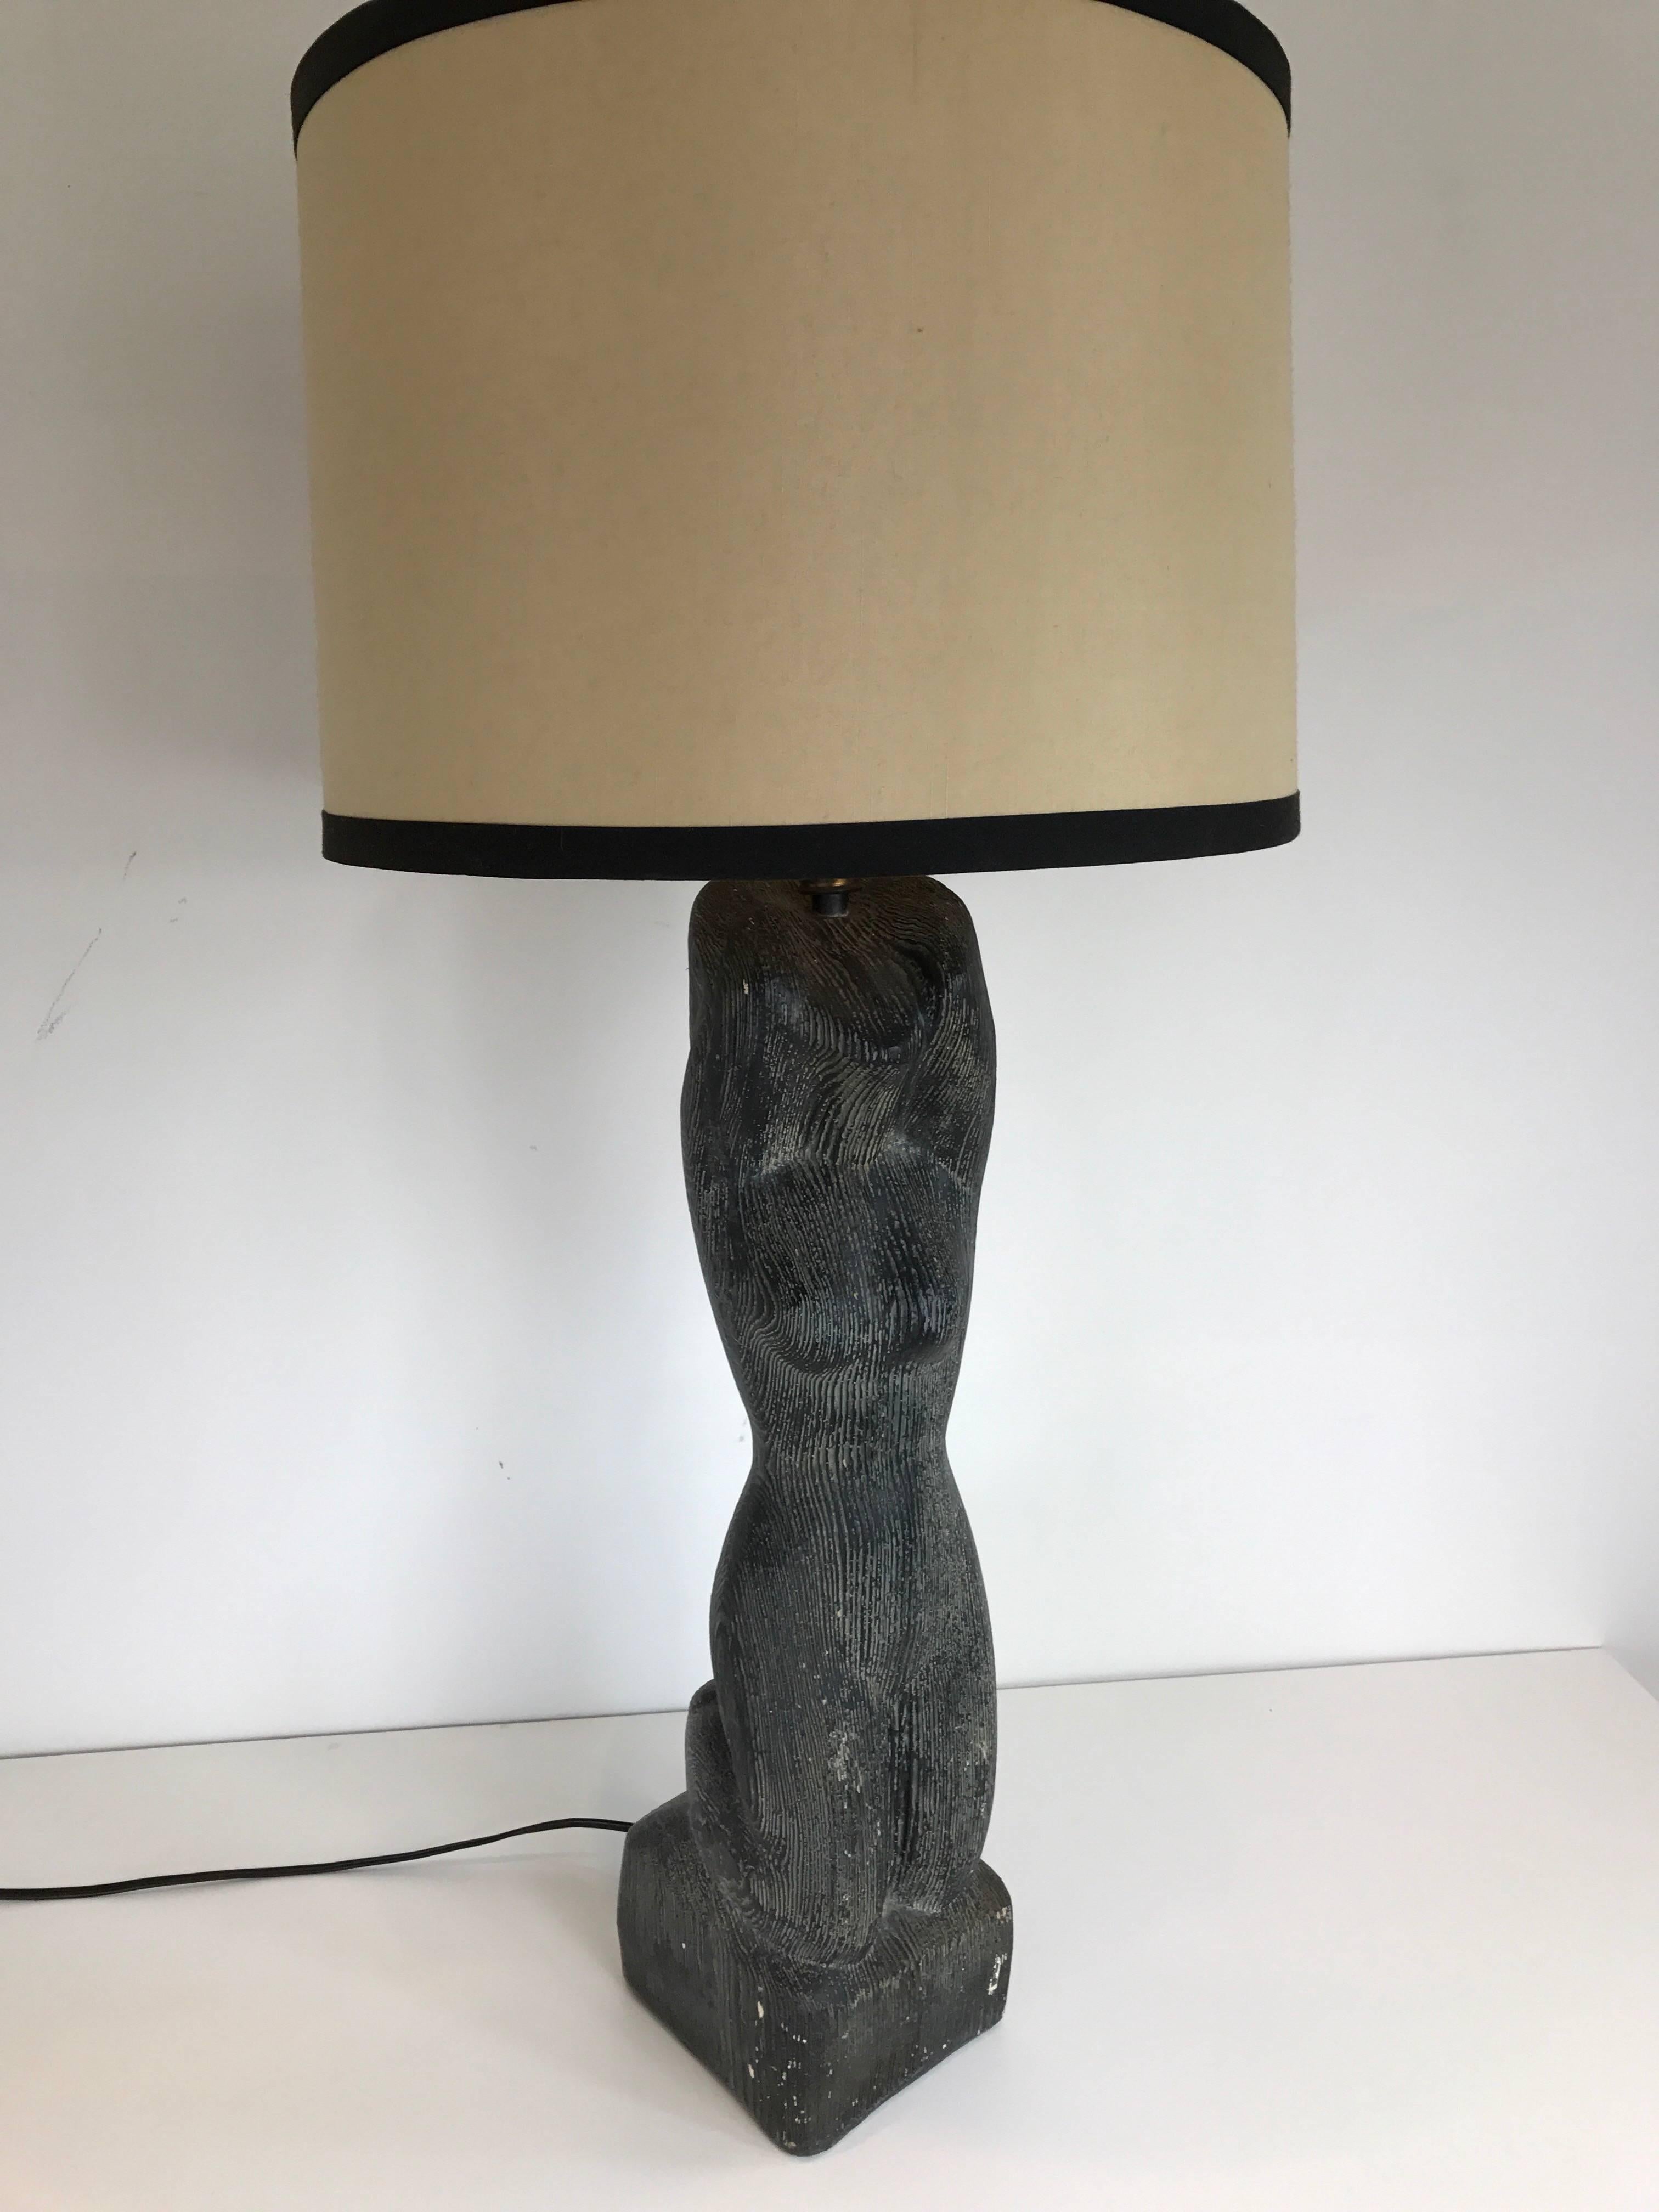 Art Deco plaster figural table lamp of a woman. Dark grey shading with striated indentations. Shade for display purposes only.